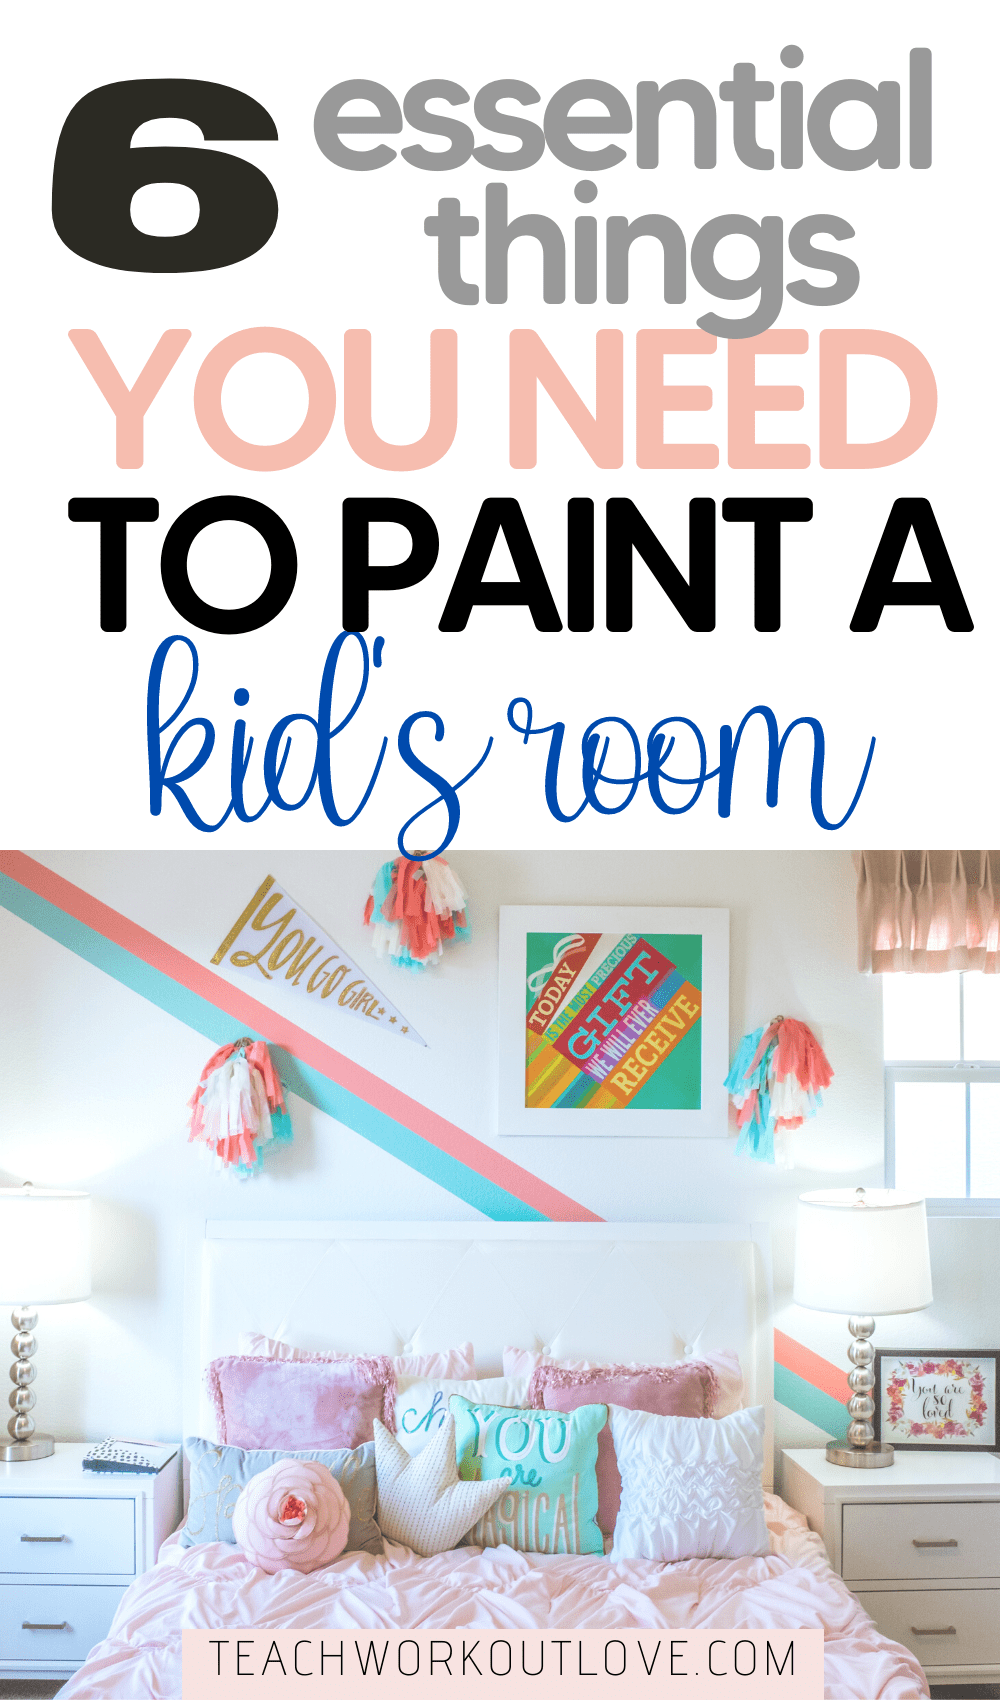 Painting your kid's bedroom probably ranks around number 3 for most exciting events that can happen to a kid. Here's what you need to get started today!